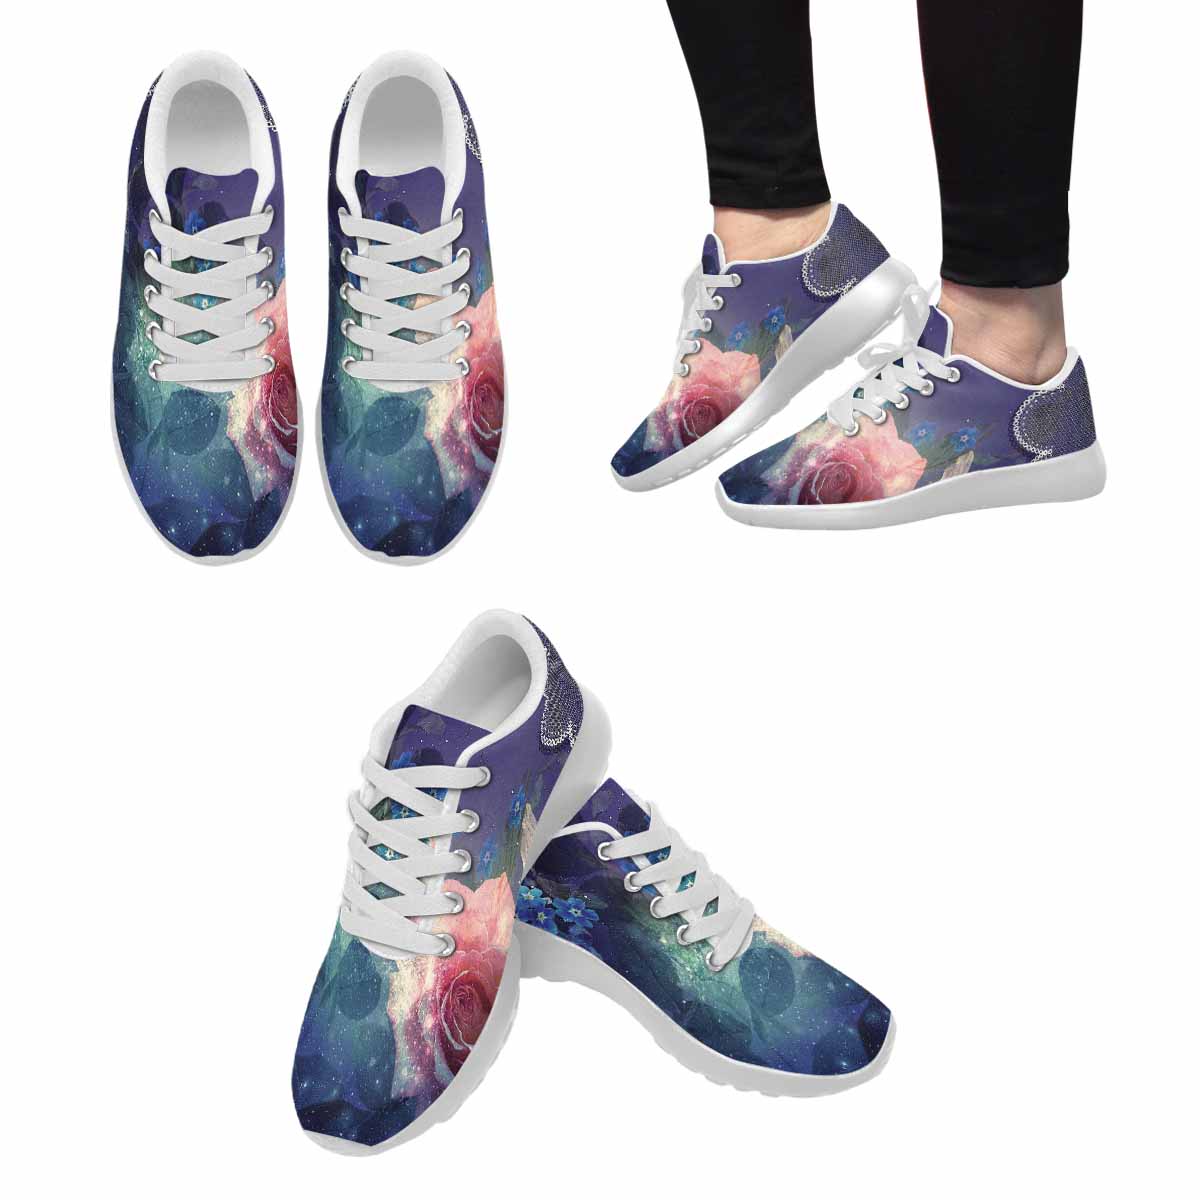 Victorian lace print, womens cute casual or running sneakers, shoes, design 02